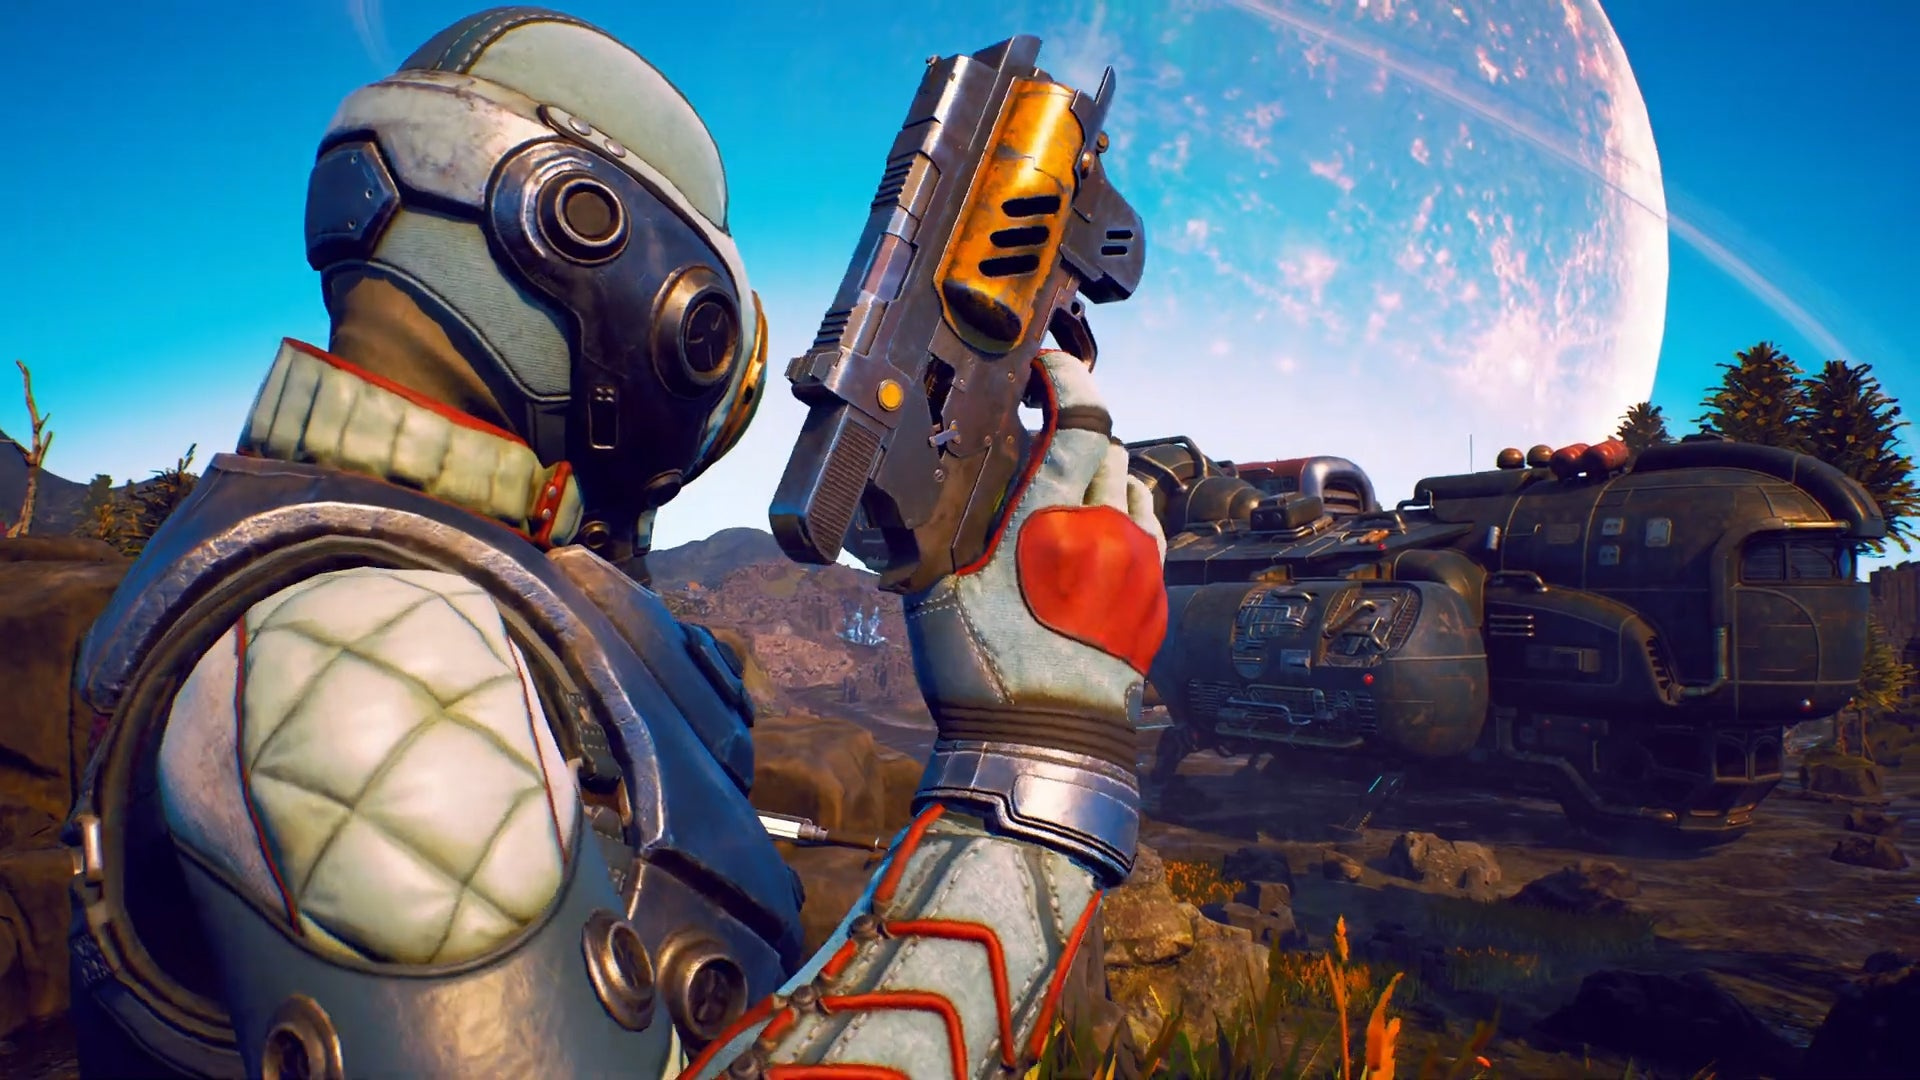 free download the outer worlds beginner guide